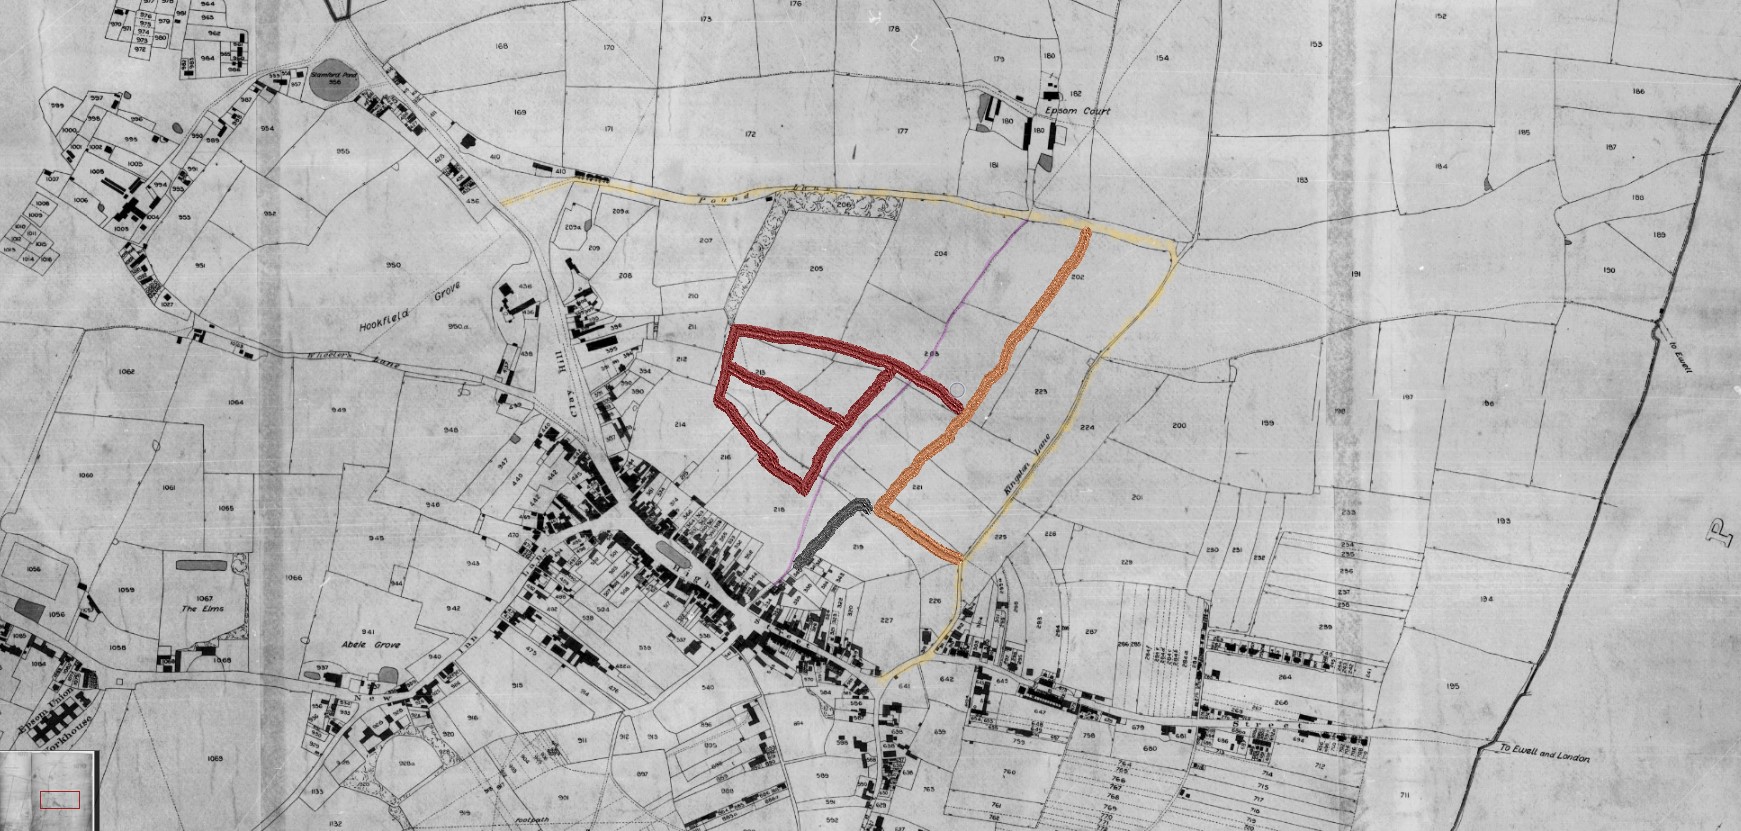 Tithe map Epsom Court and town with some new roads